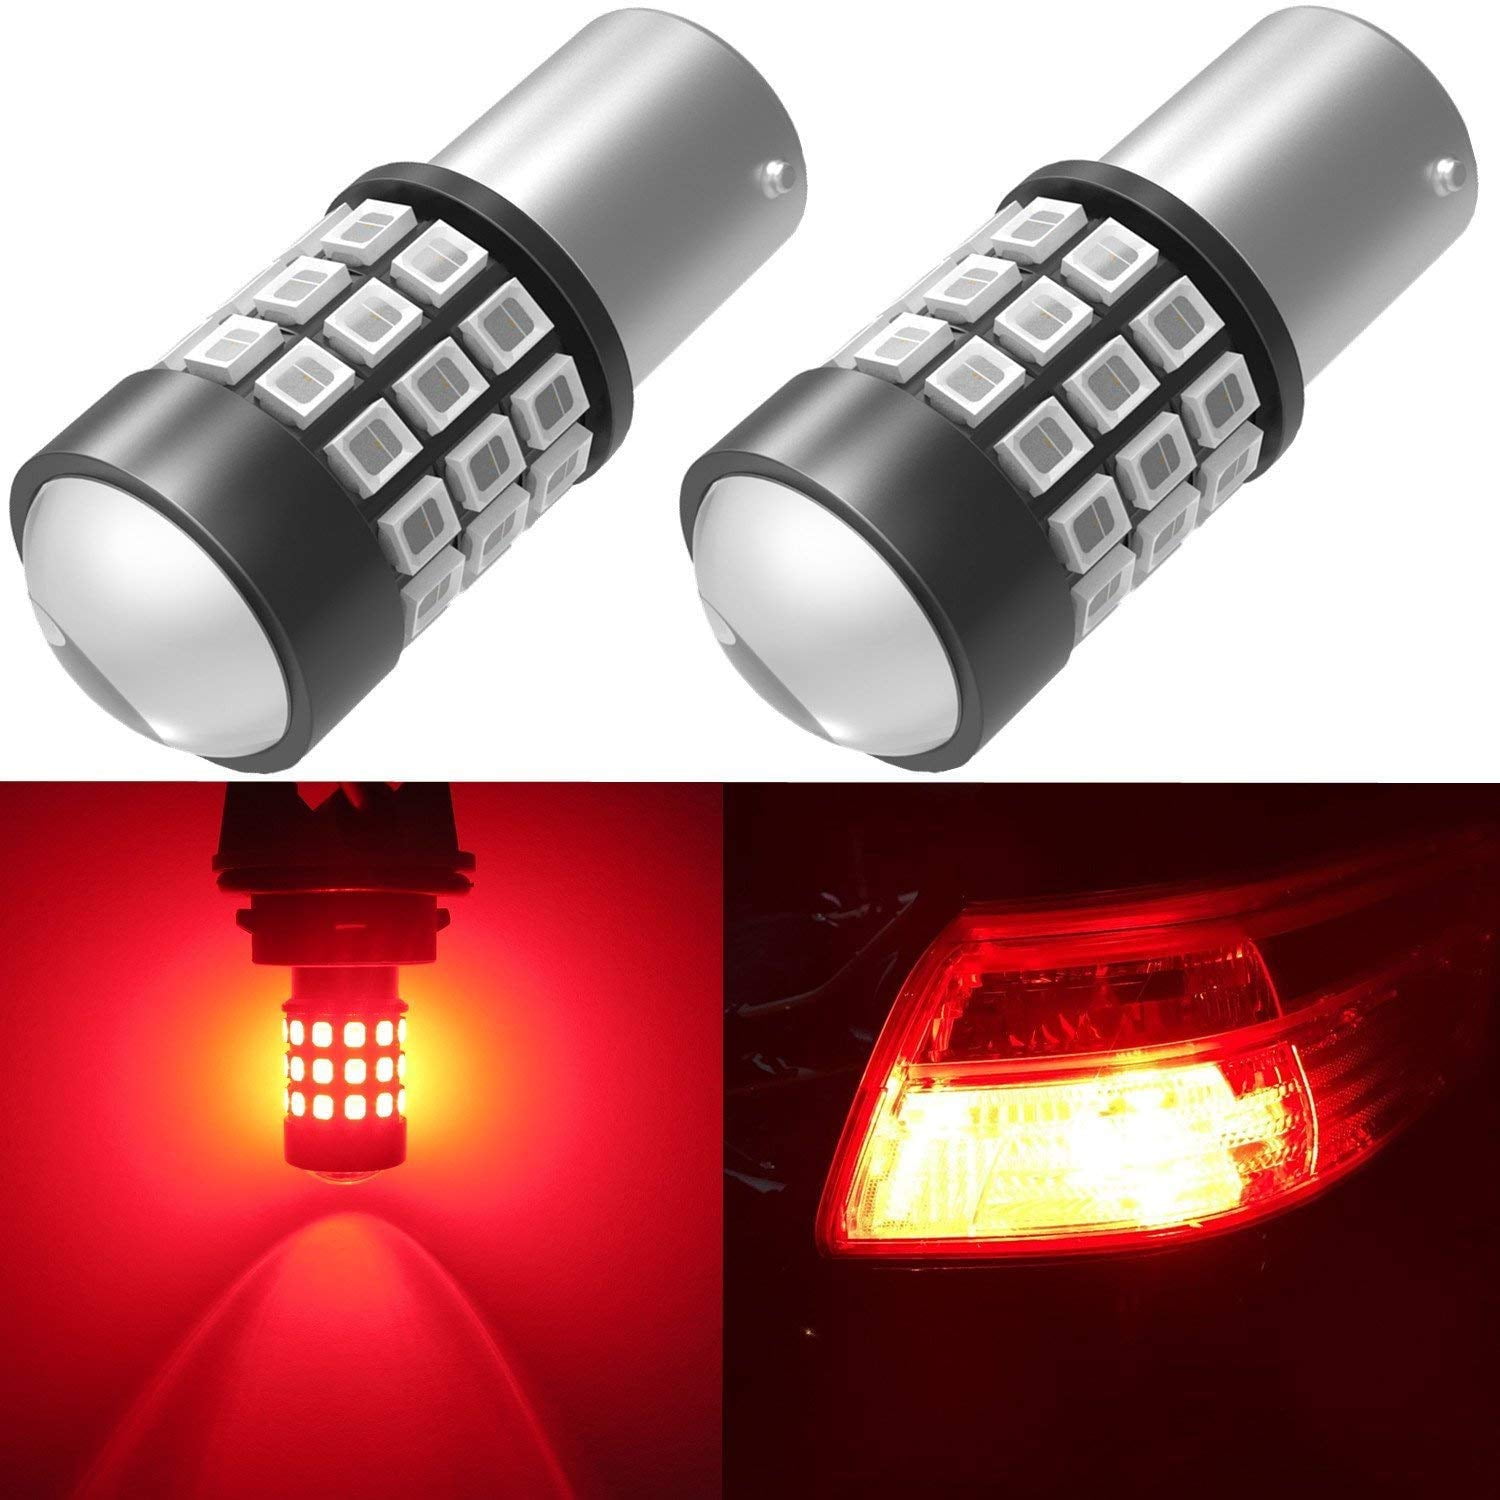 SiriusLED Compact 1157 7528 Red LED for Car Tail Brake Light Bulb Full aluminum alloy body small size Pack of 2 